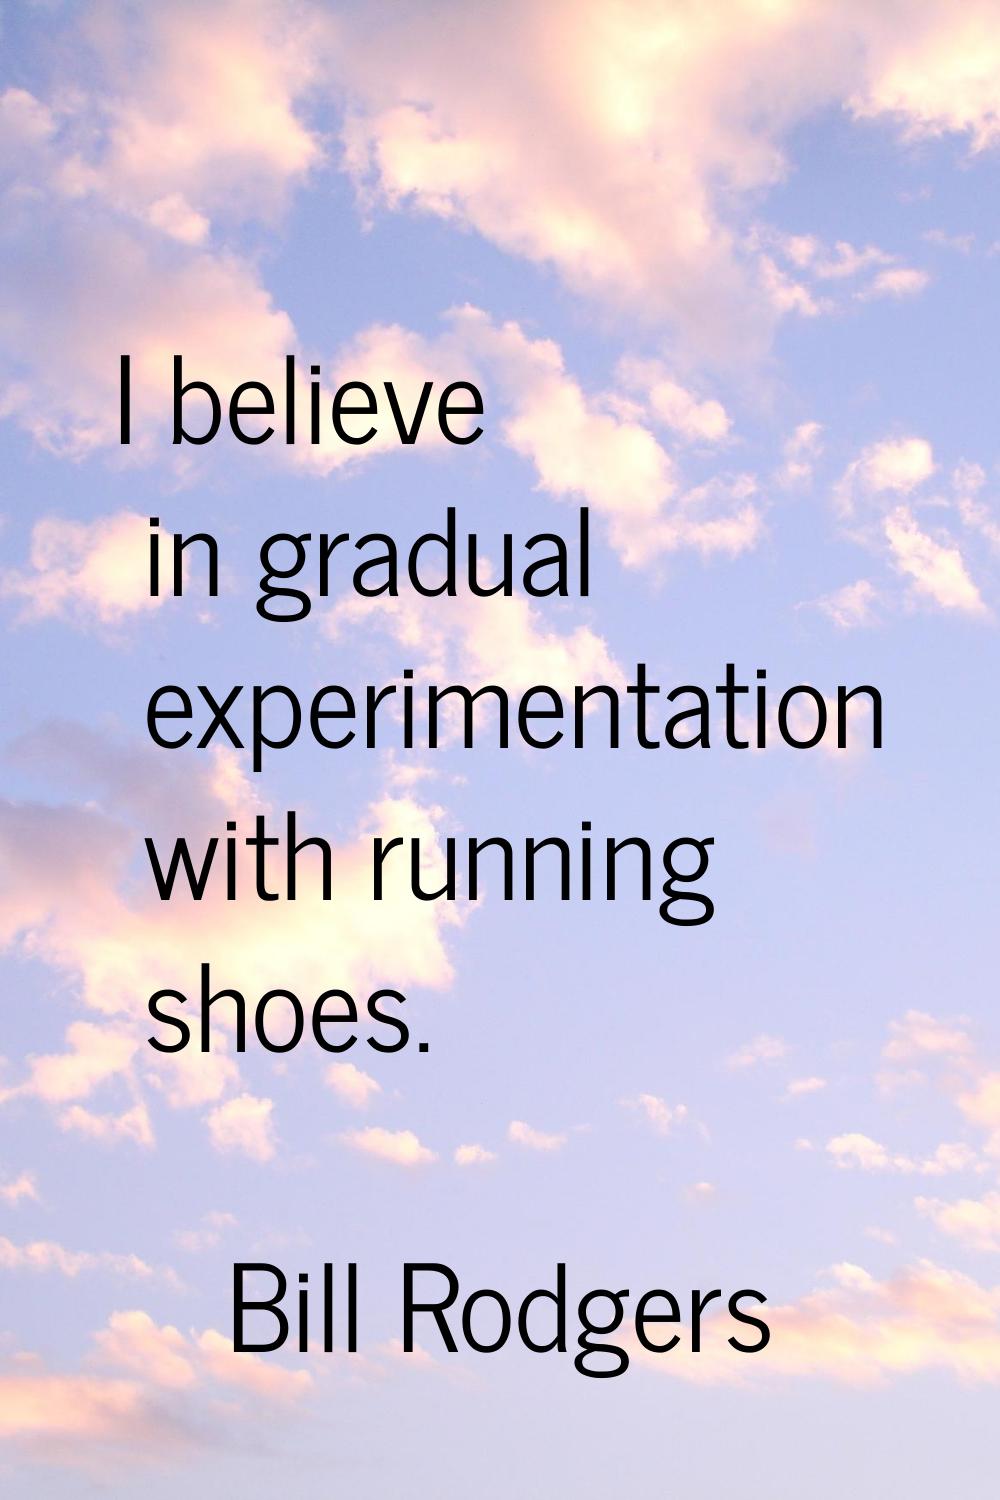 I believe in gradual experimentation with running shoes.